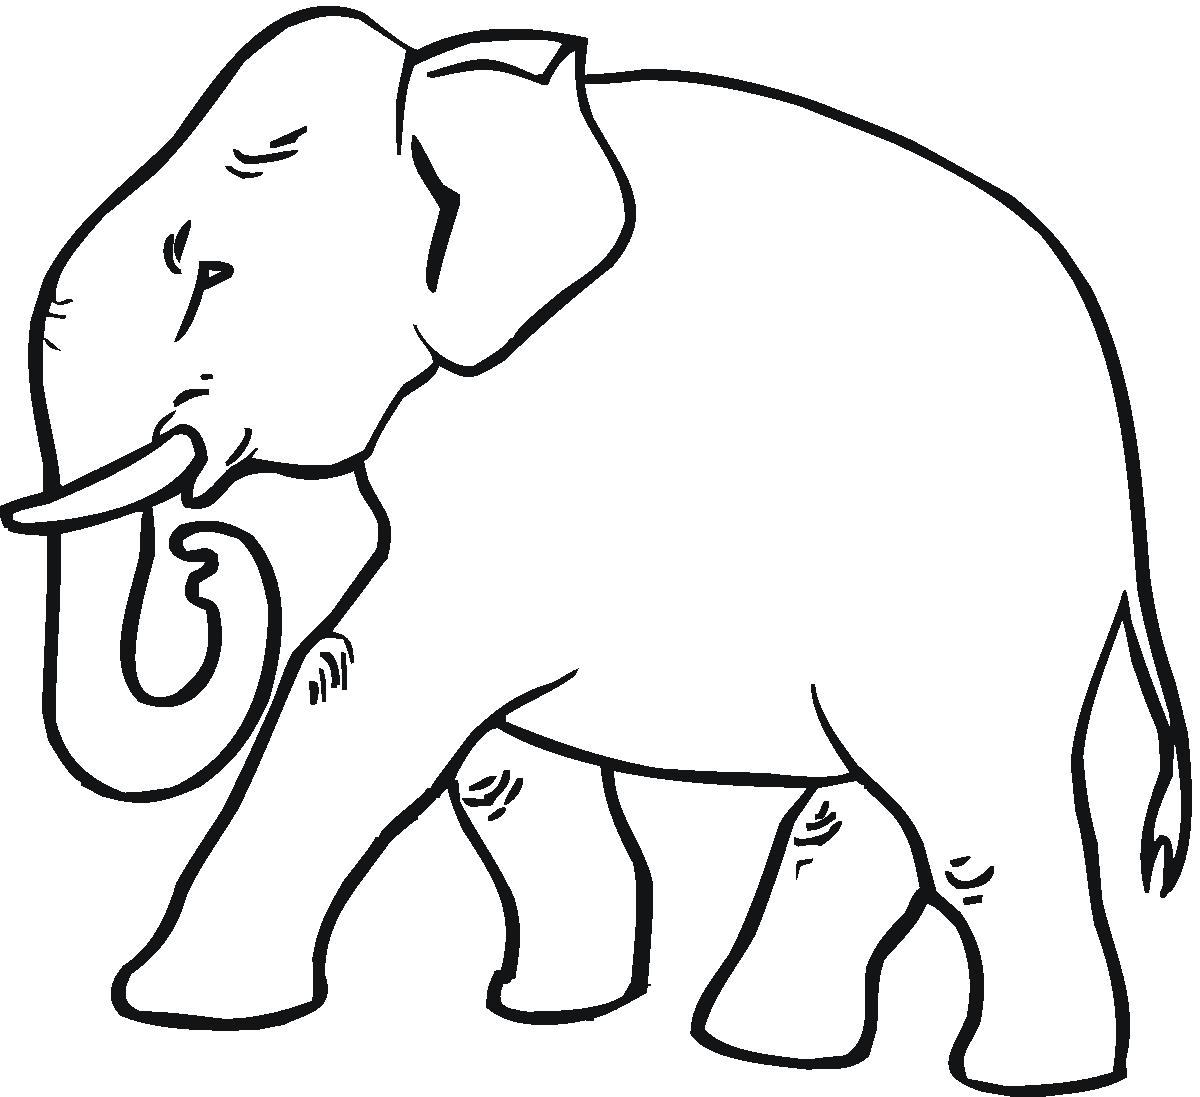 Asia Coloring Pages   Best Coloring Pages For Kids